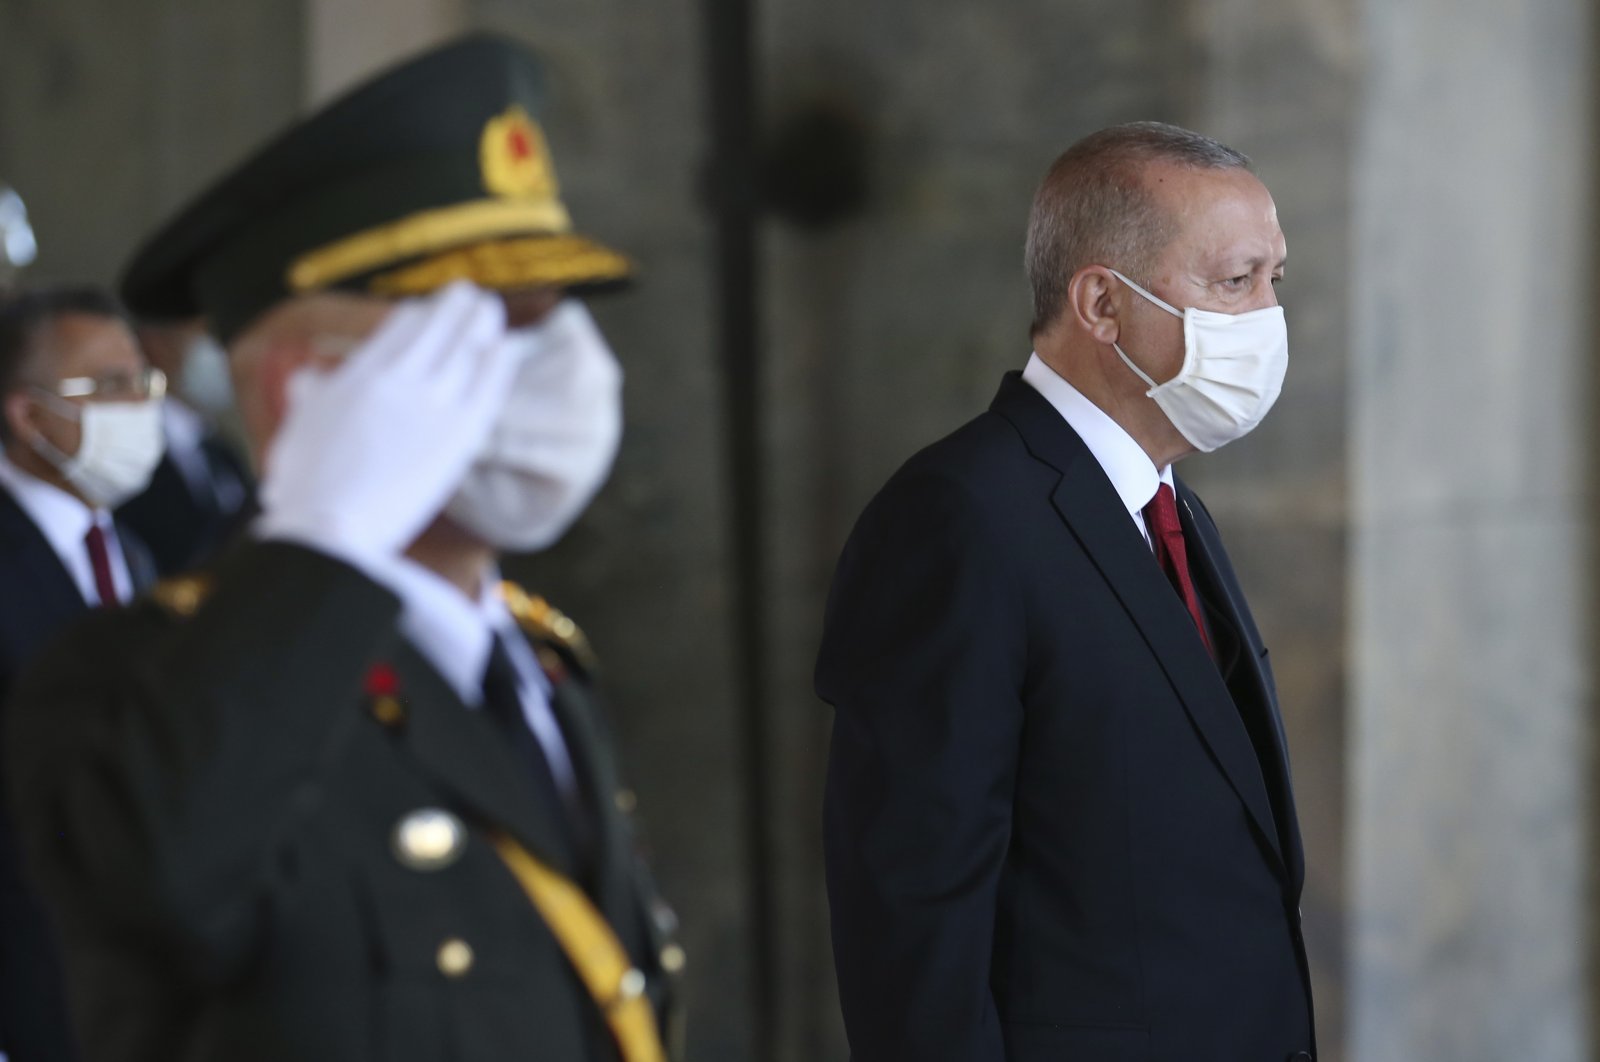 President Recep Tayyip Erdoğan (R) stands with a general during a ceremony at the mausoleum of Mustafa Kemal Atatürk, founder of the Republic of Turkey, in Ankara, Turkey, Aug. 30, 2020. (AP Photo)